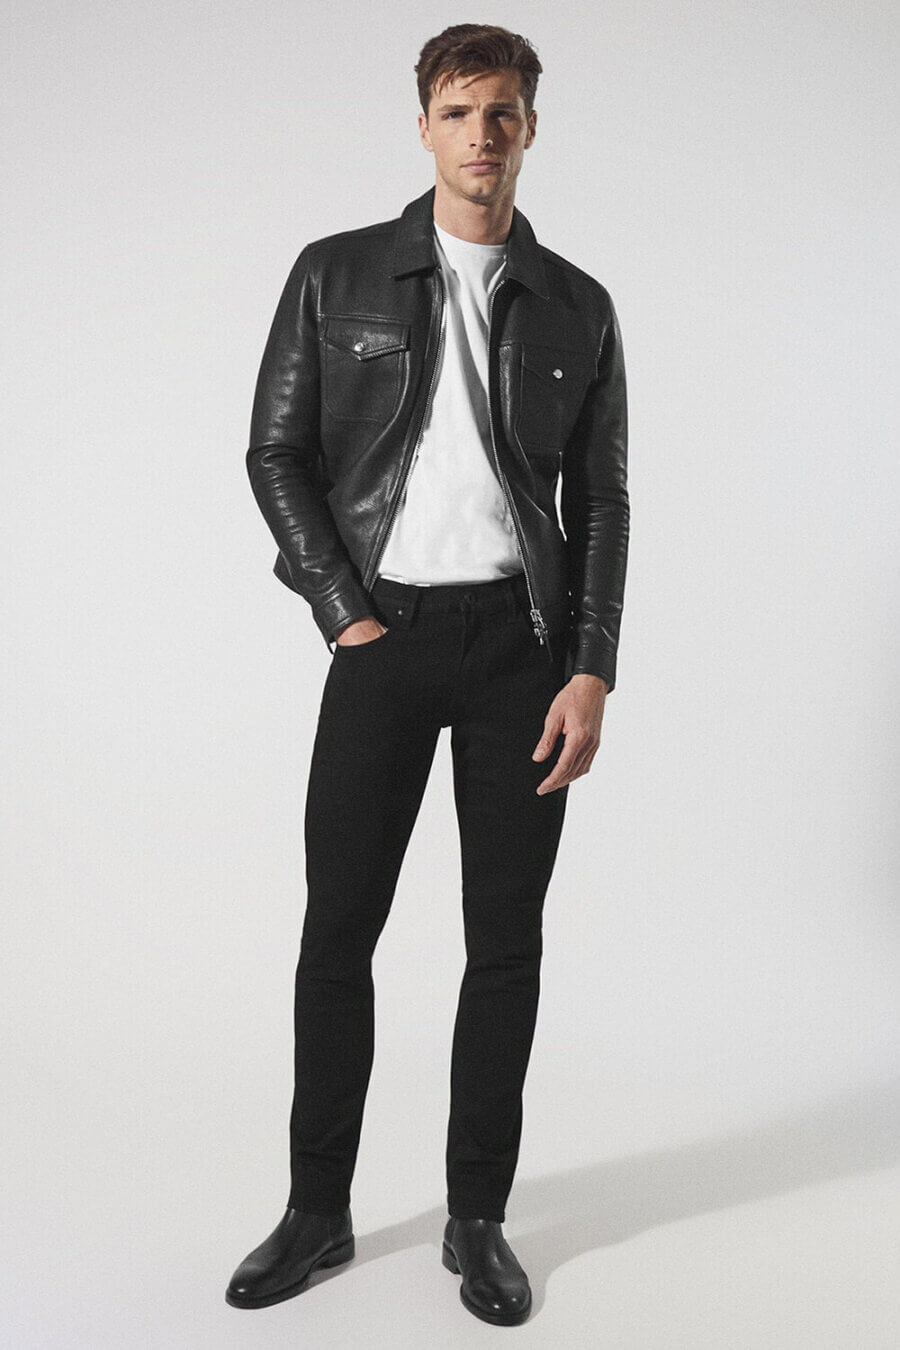 Men's black jeans and leather jacket outfit with chelsea boots